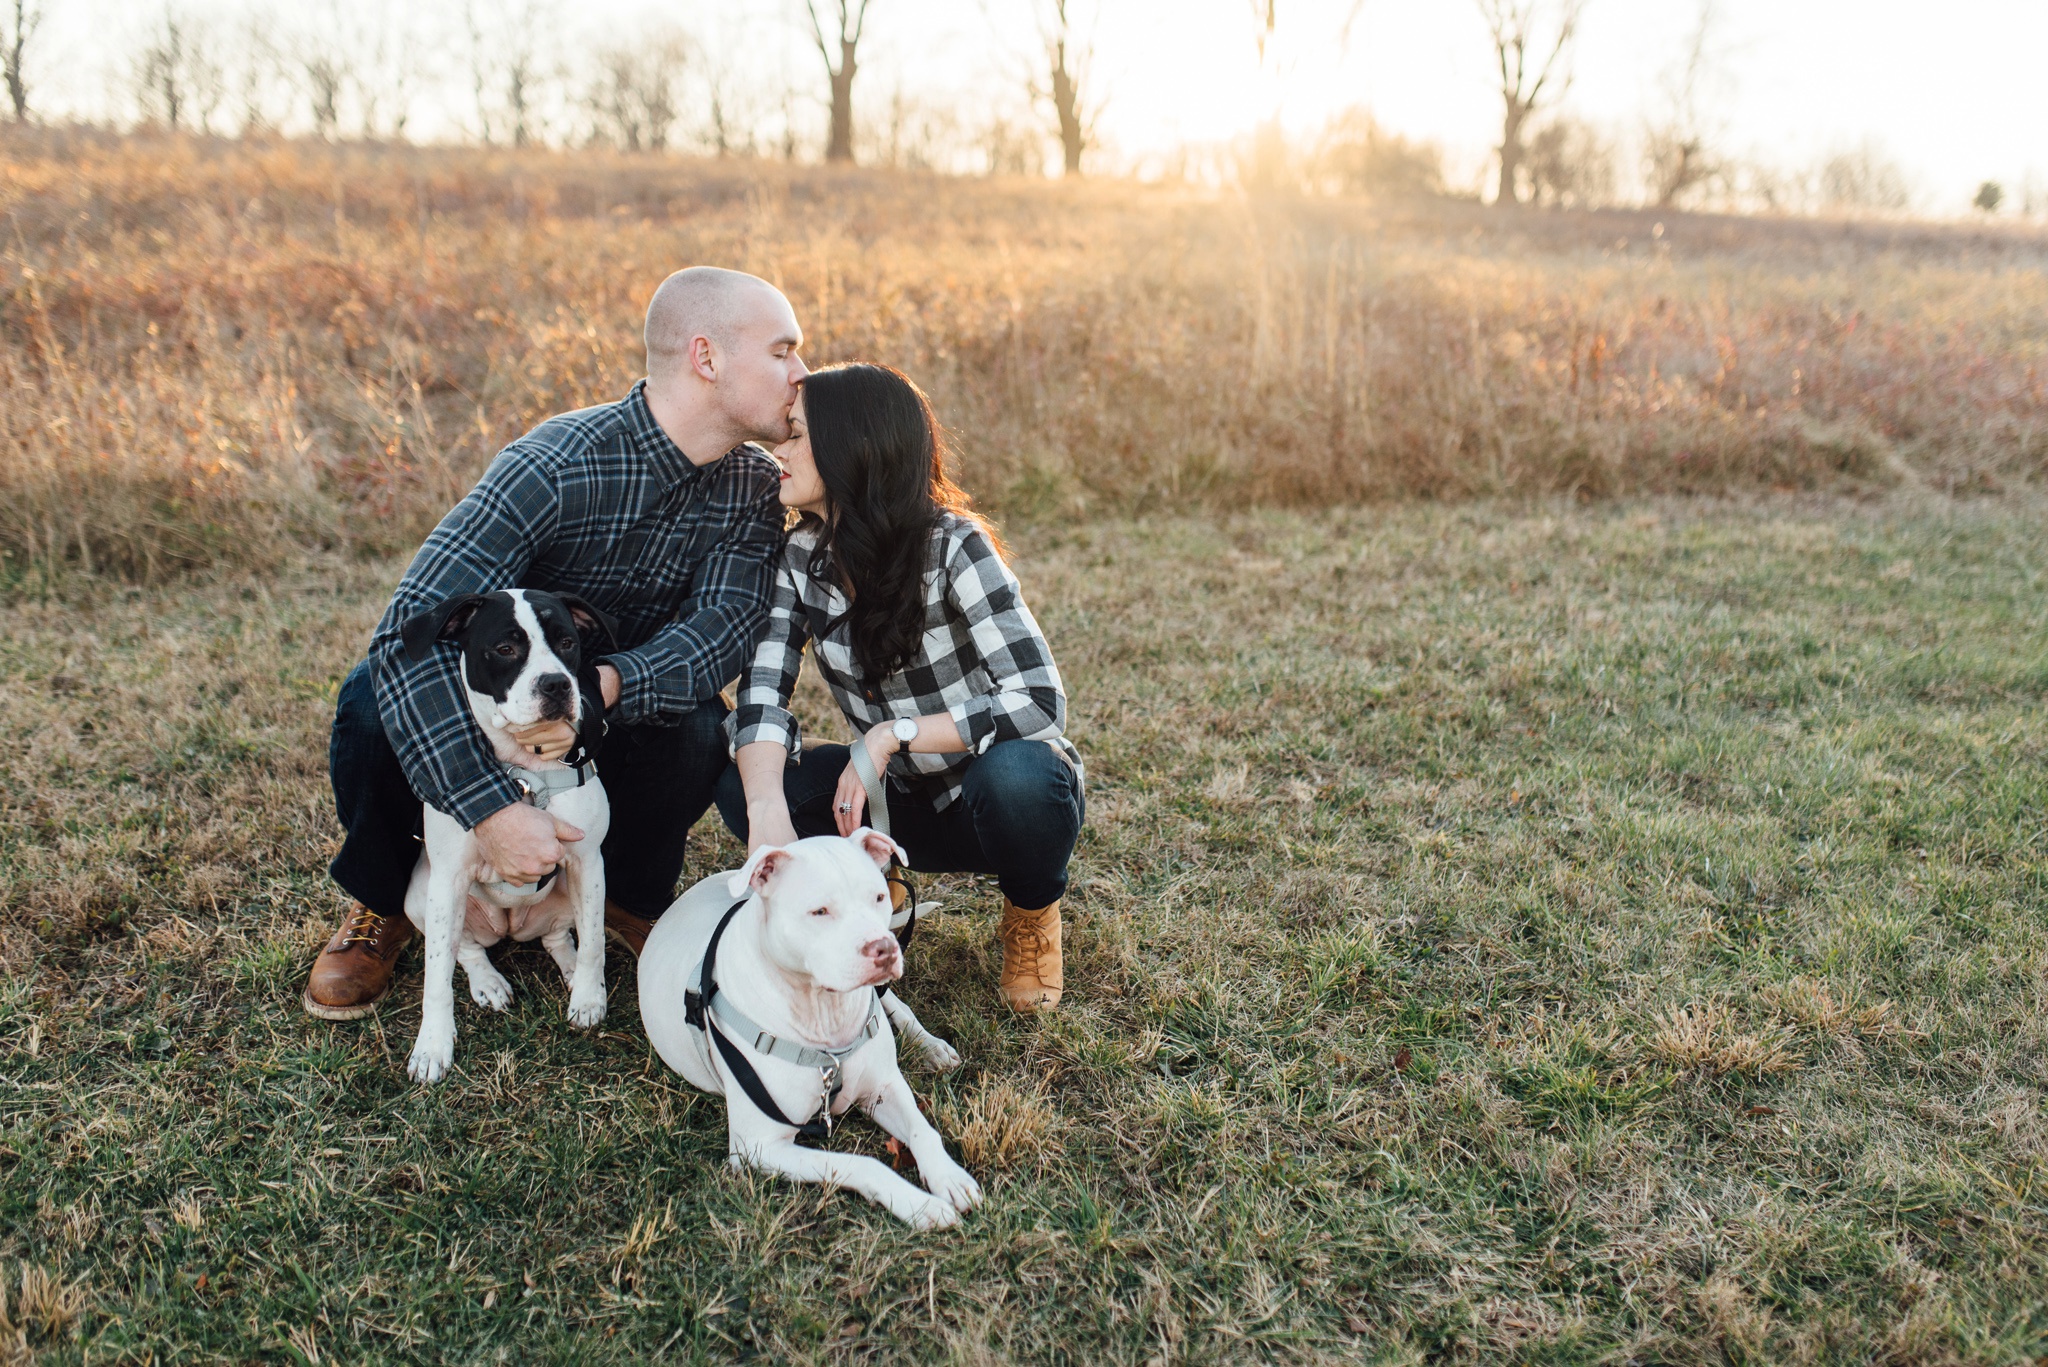 roni-graham-valley-forge-anniversary-session-alison-dunn-photography-photo-017